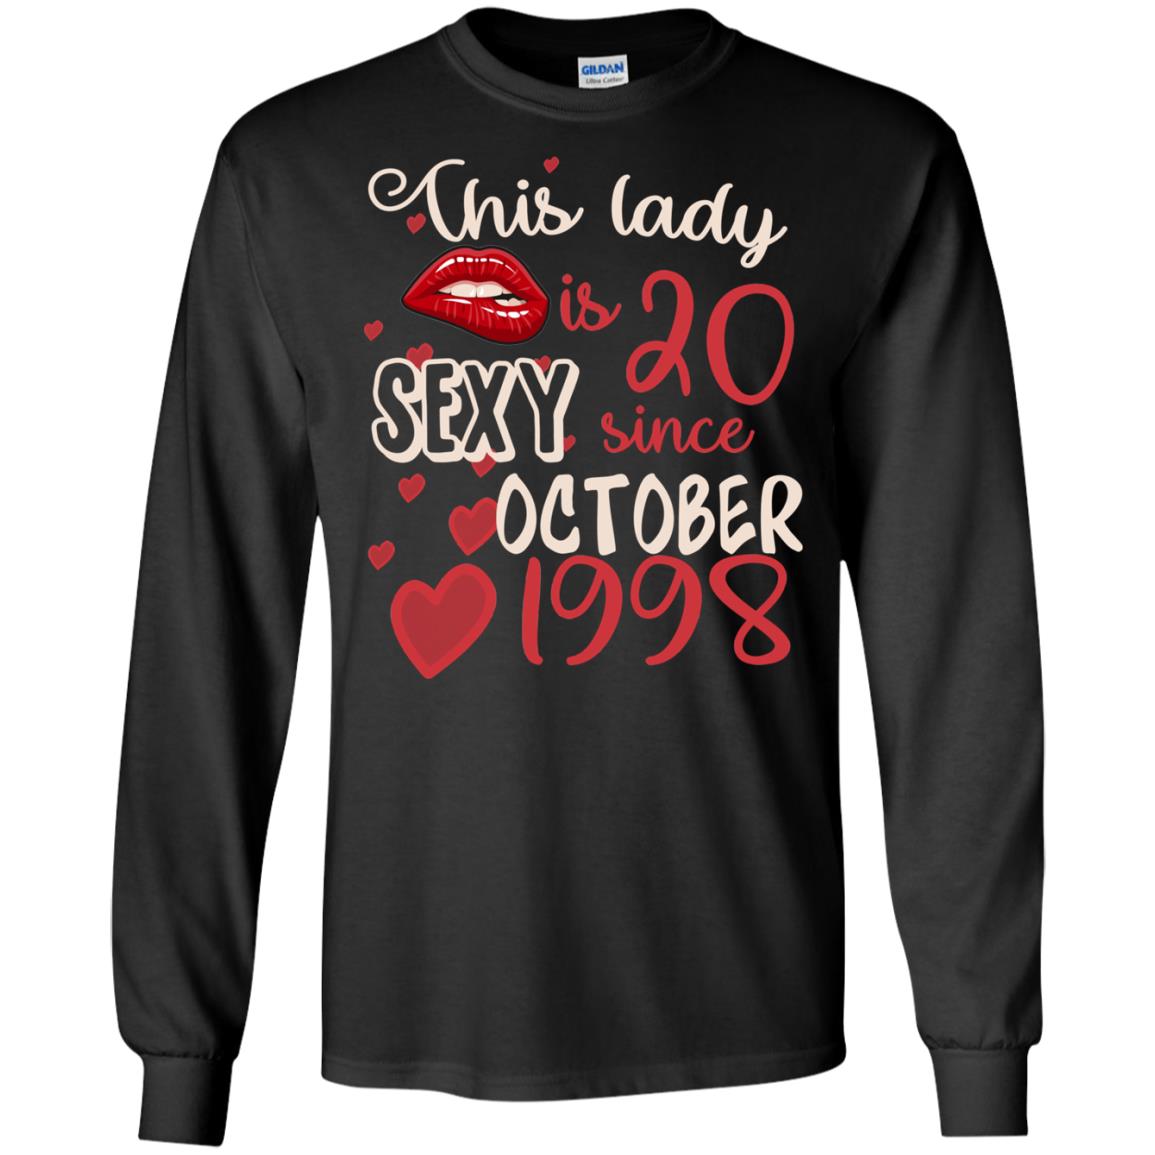 This Lady Is 20 Sexy Since October 1998 20th Birthday Shirt For October WomensG240 Gildan LS Ultra Cotton T-Shirt